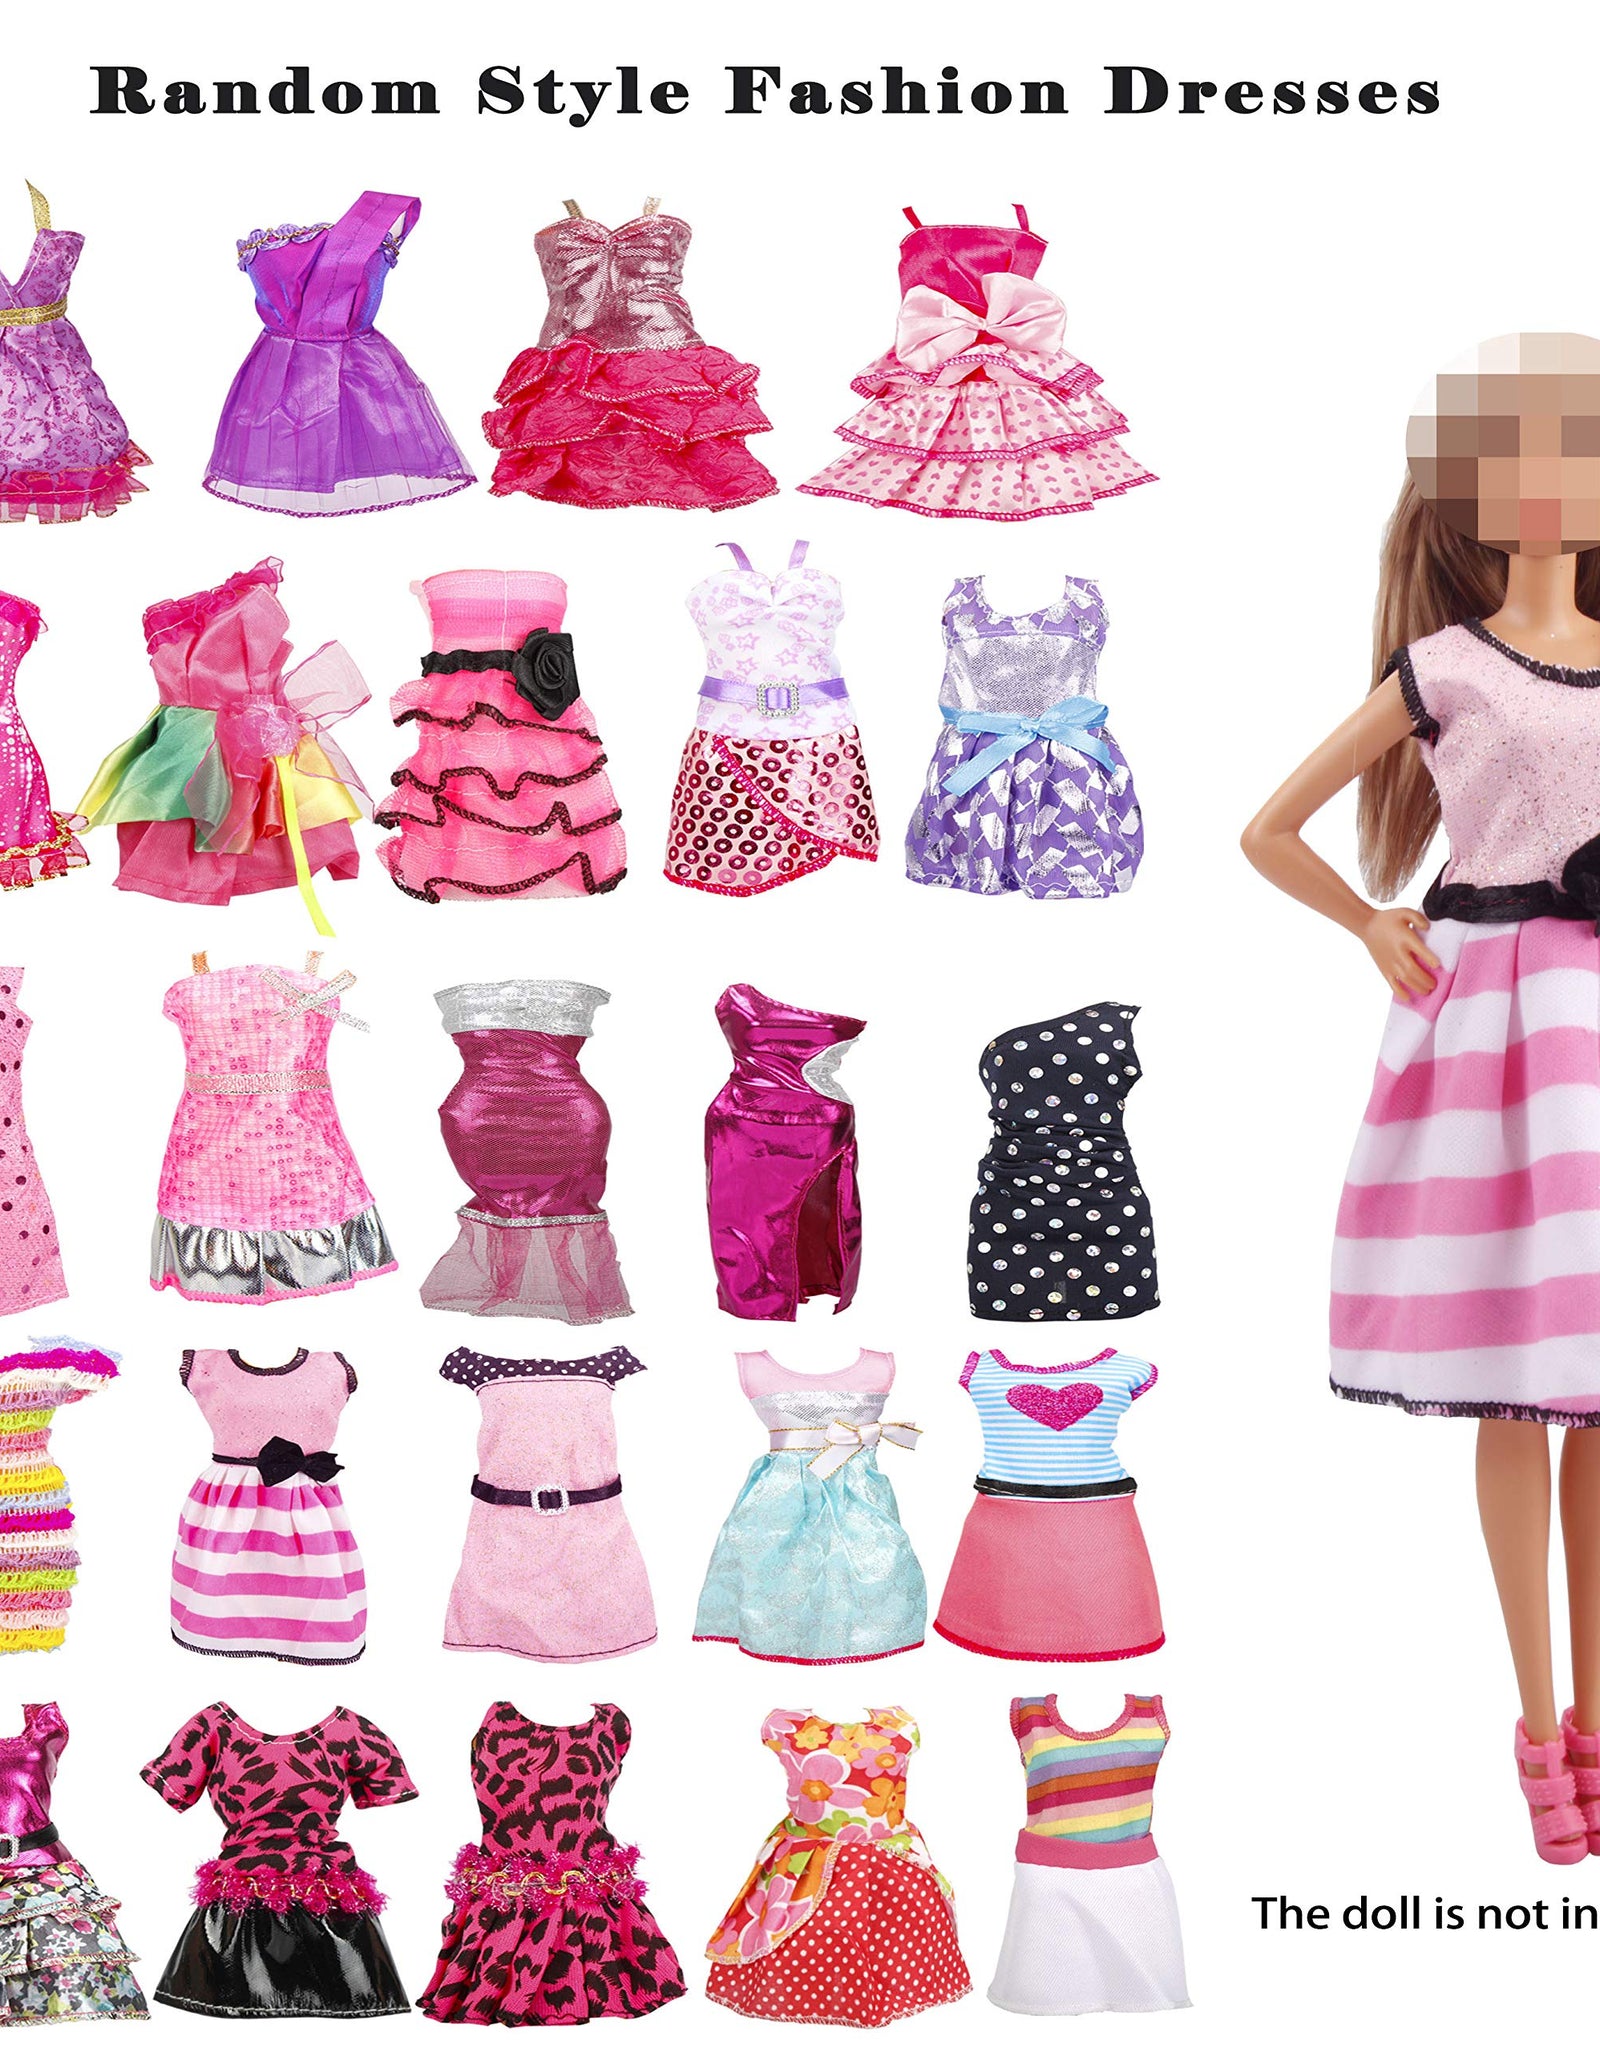 35 Pack Handmade Doll Clothes Including 5 Wedding Gown Dresses 5 Fashion Dresses 4 Braces Skirt 3 Tops and Pants 3 Bikini Swimsuits 15 Shoes and Bonus 10 Hangers for 11.5 Inch Dolls